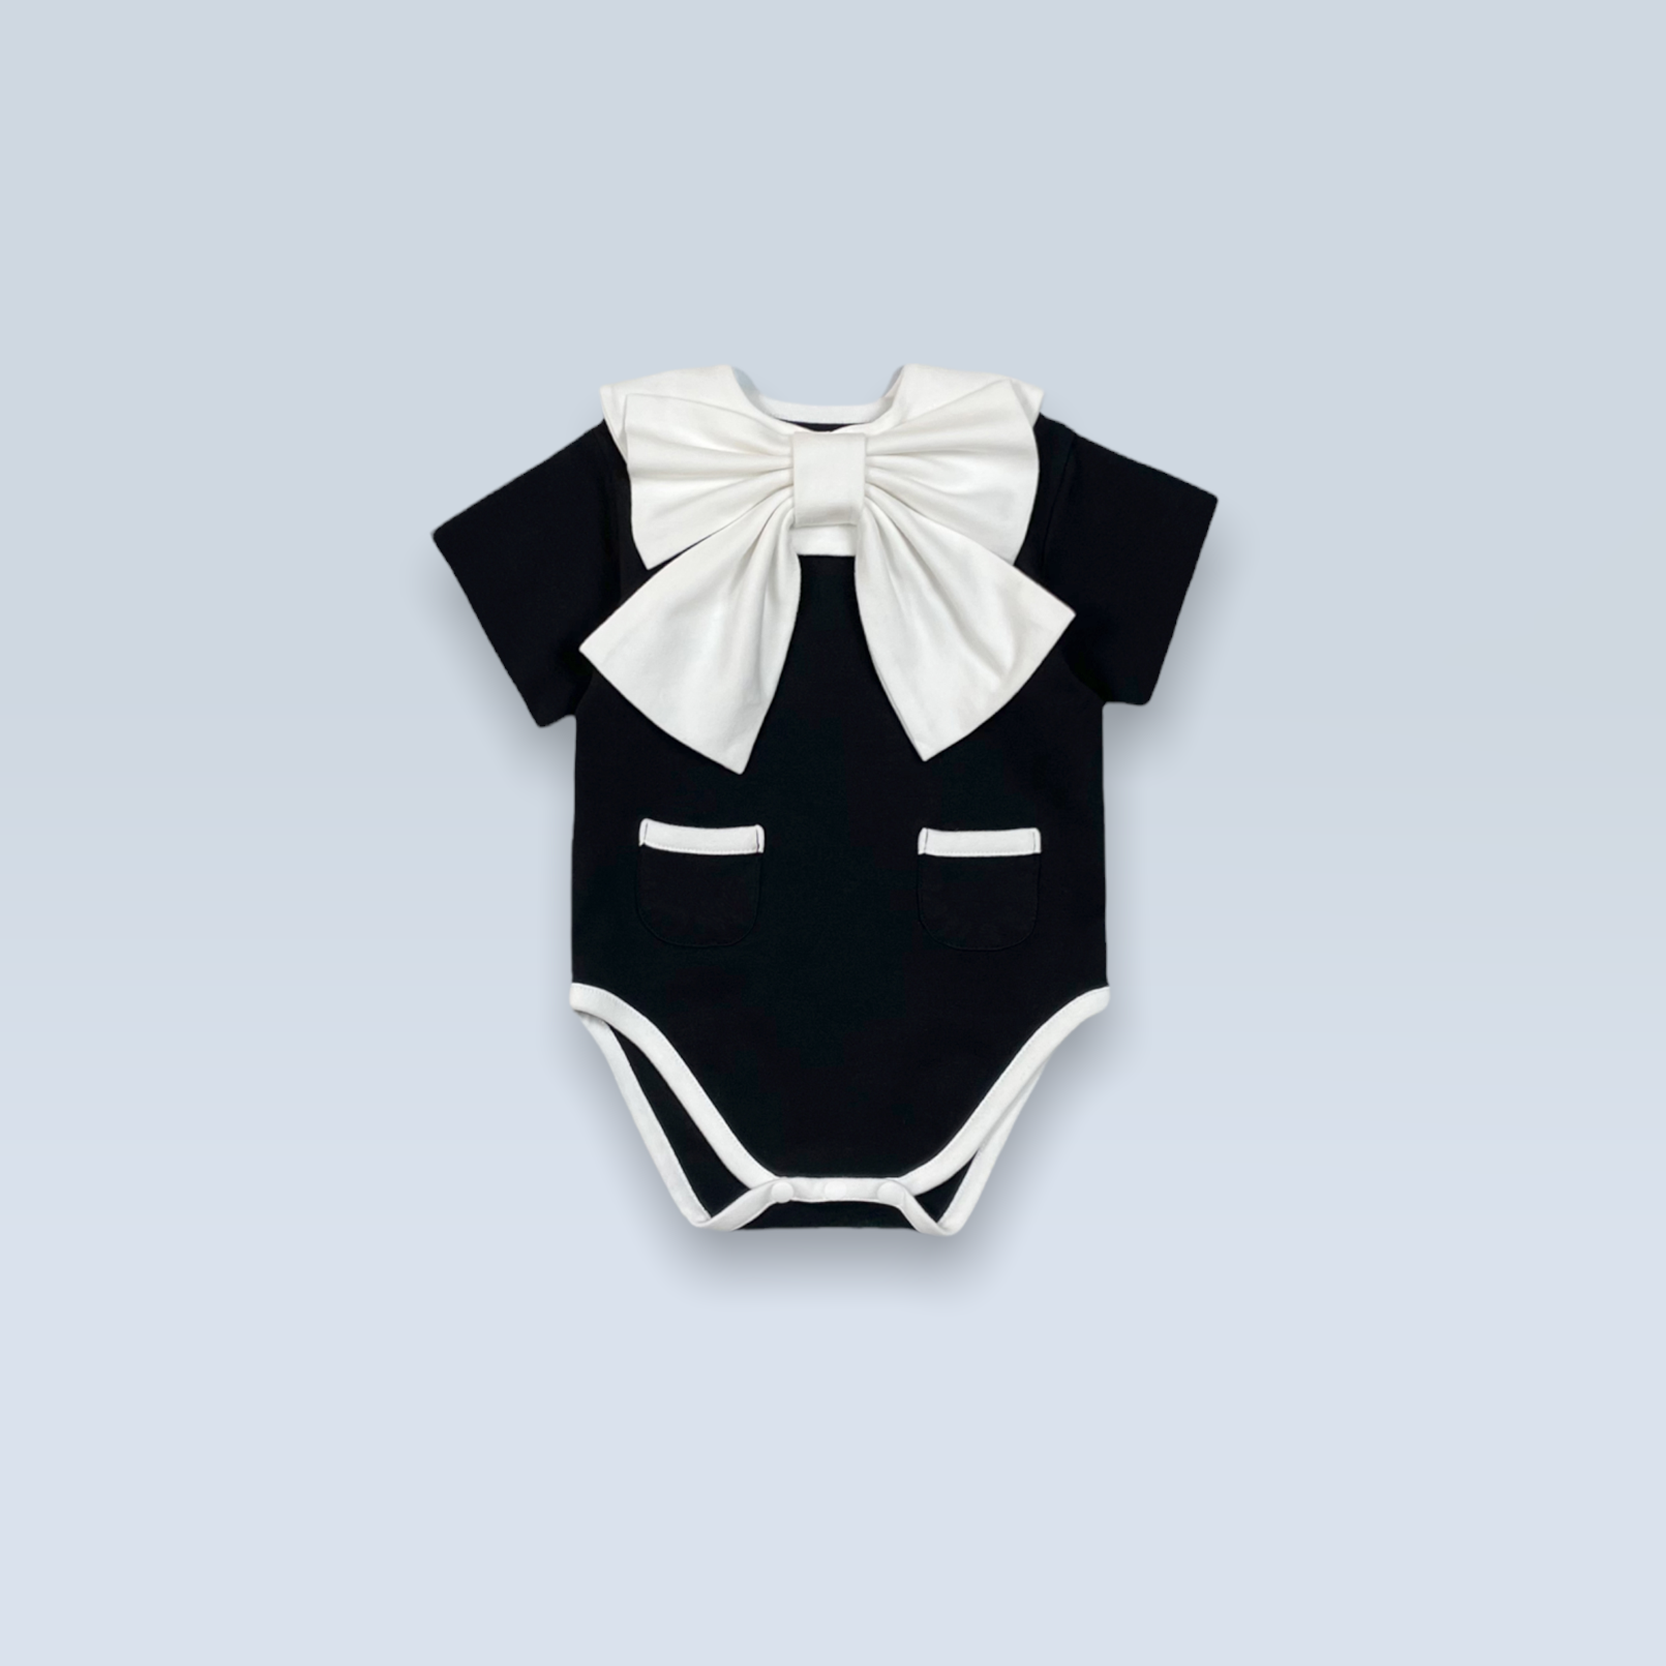 Dress Up Bodysuit (Black): Minimalistic design with contrasting lines and charming pocket details. Paired with a ribbon scarf bib for a formal look.